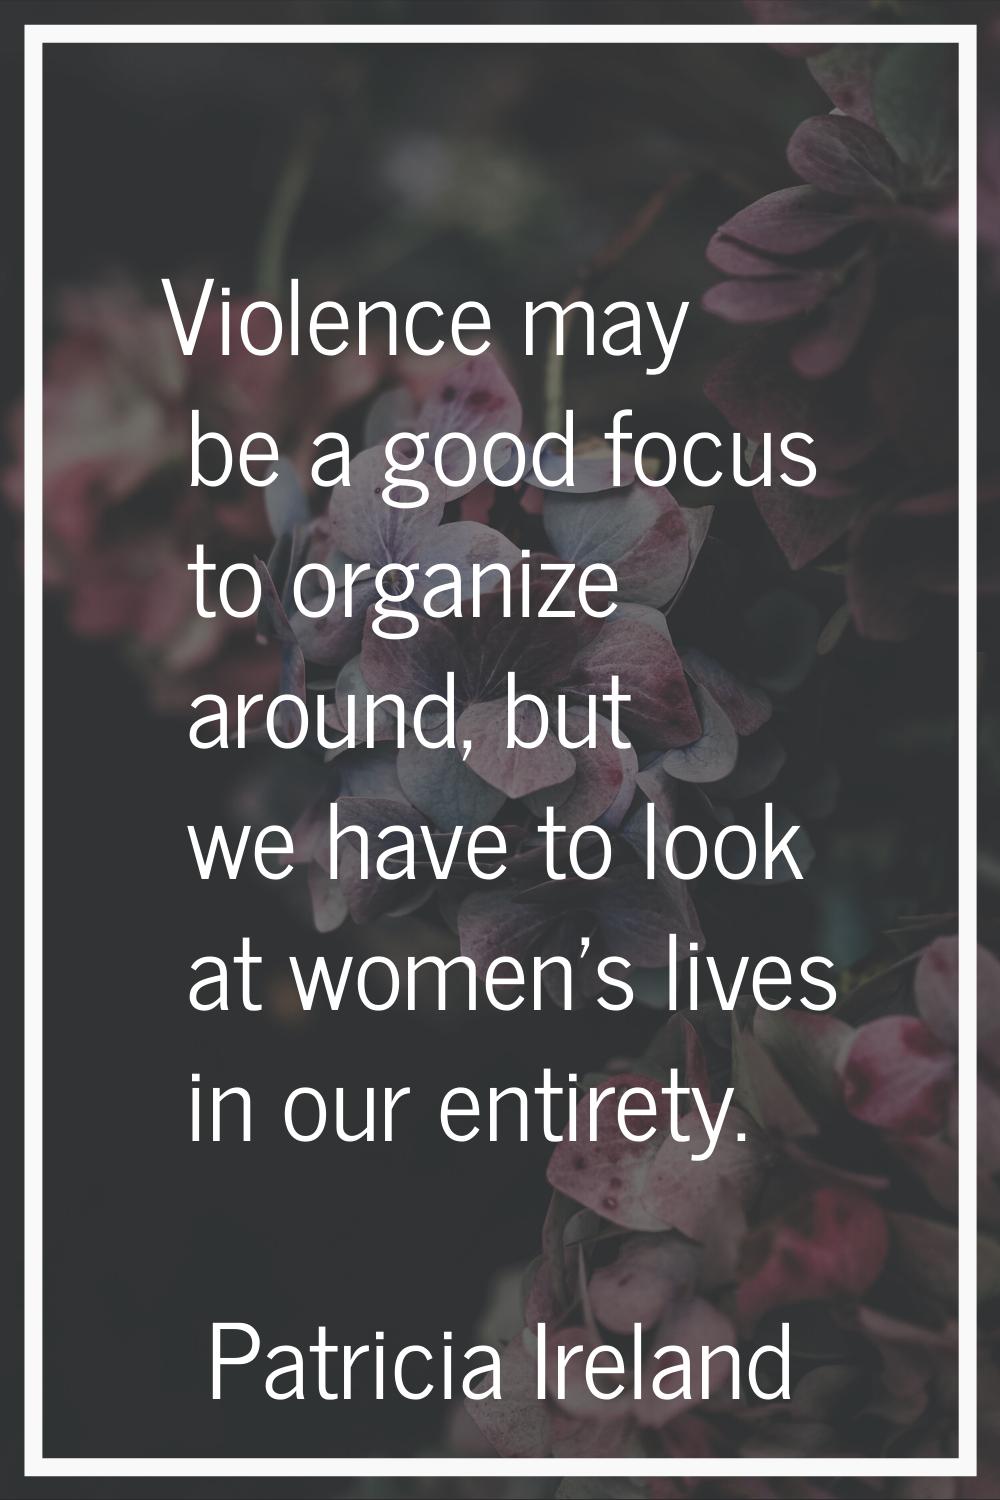 Violence may be a good focus to organize around, but we have to look at women's lives in our entire